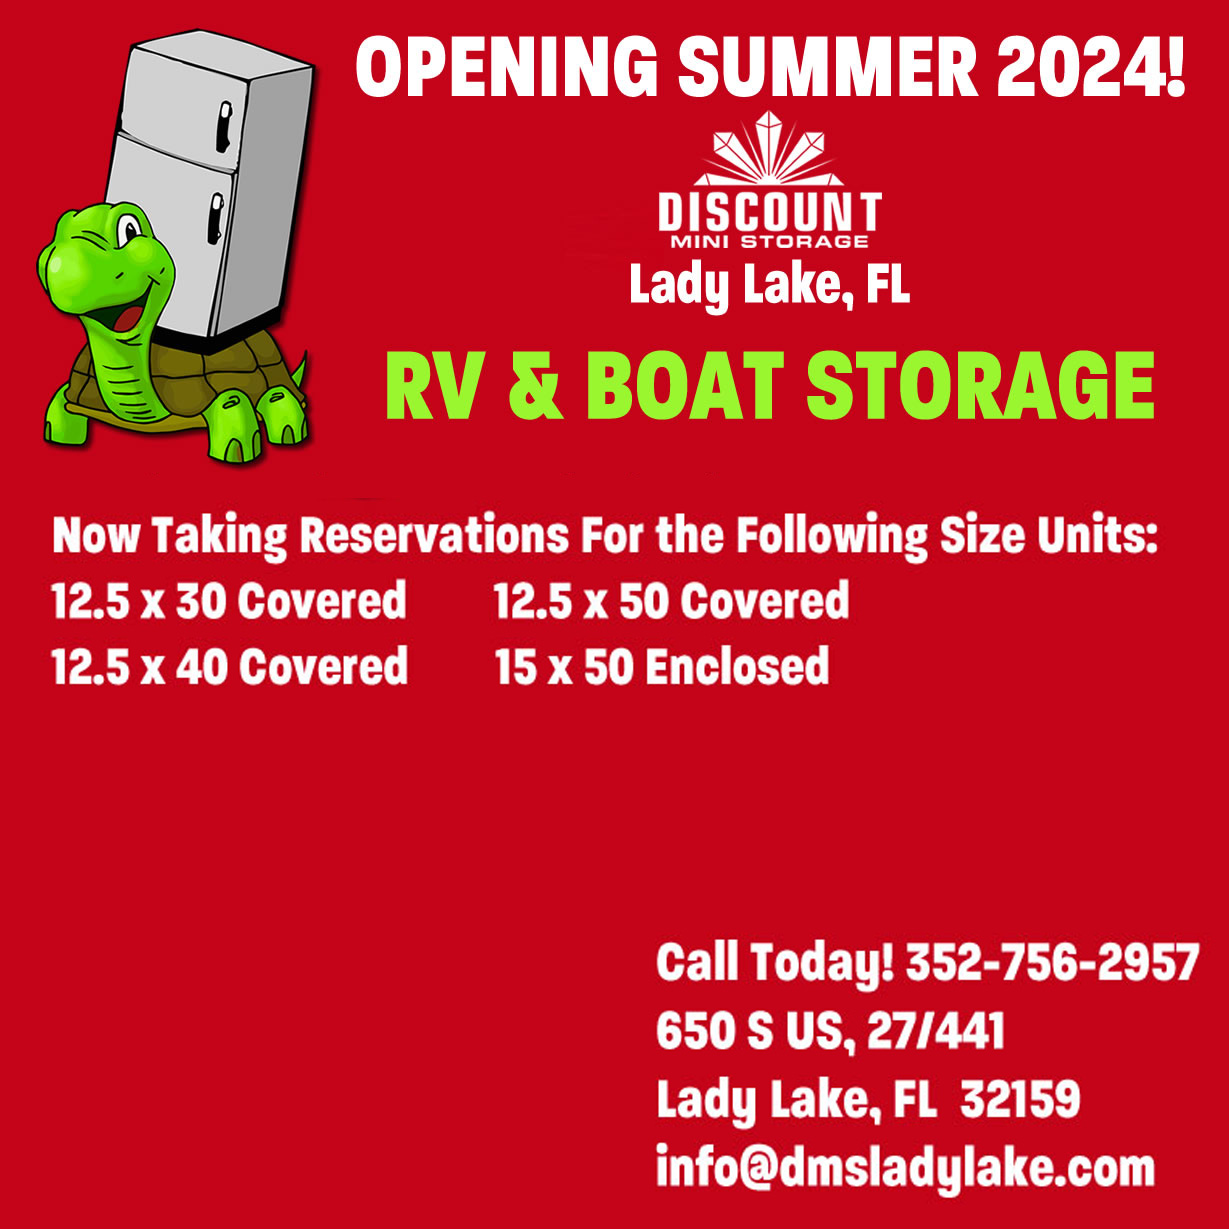 Discount Mini Storage of Lady Lake's RV & Boat Storage facility is opening in Summer 2024! We're now taking reservations for 12.5' x 30' up to 15' x 50' units, call us today (352) 756-2957 or email info@dmsladylake.com.